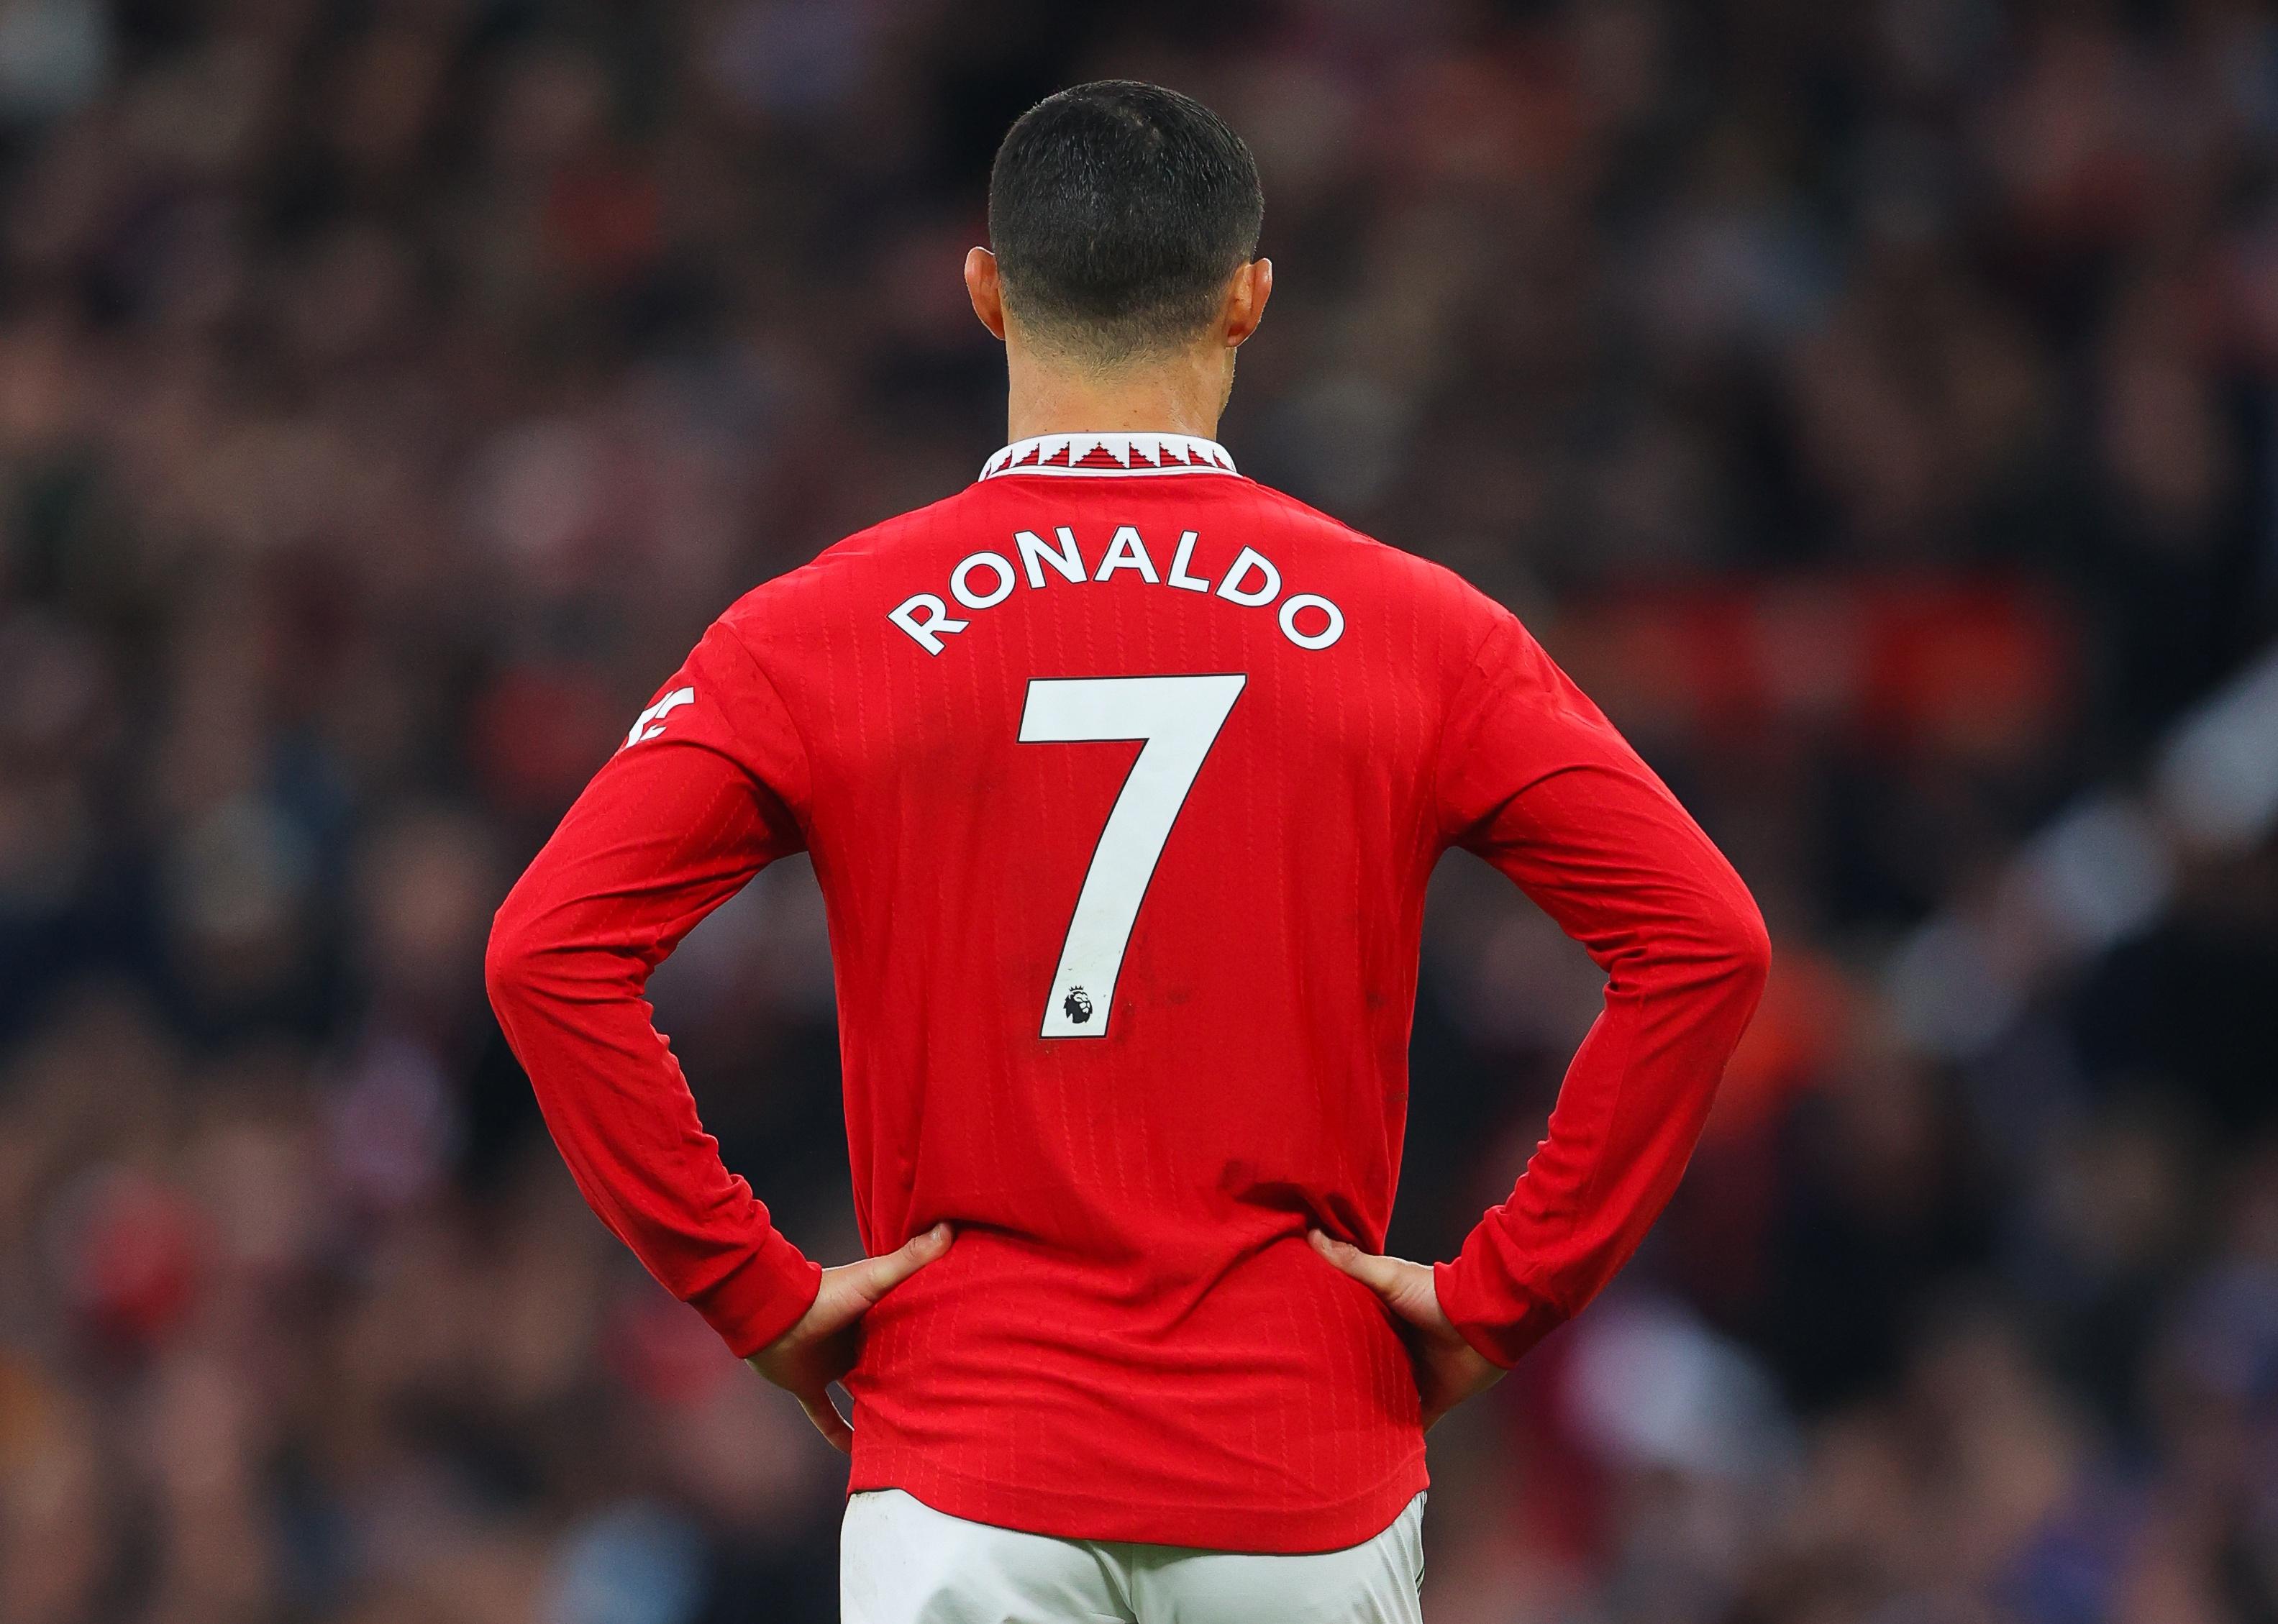 Back view of Cristiano Ronaldo during a match